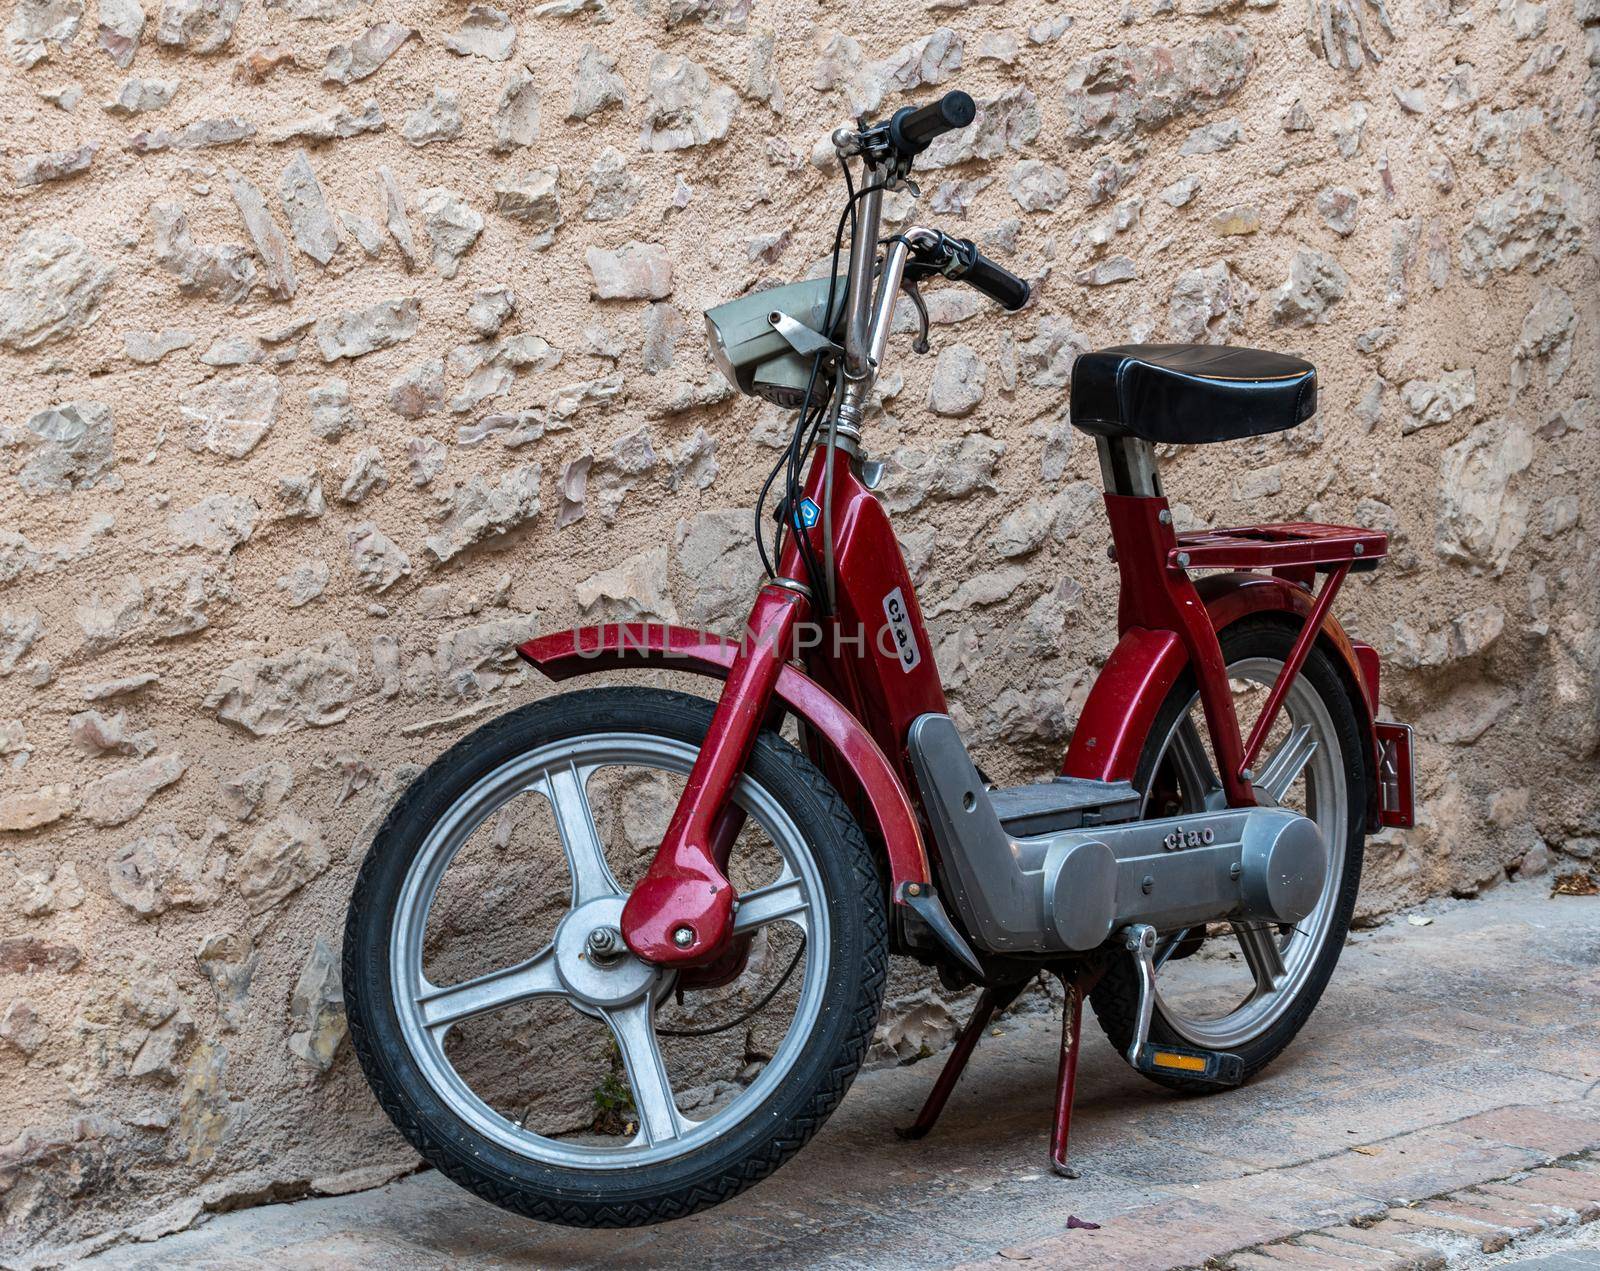 vintage piaggio scooter hi red color by carfedeph